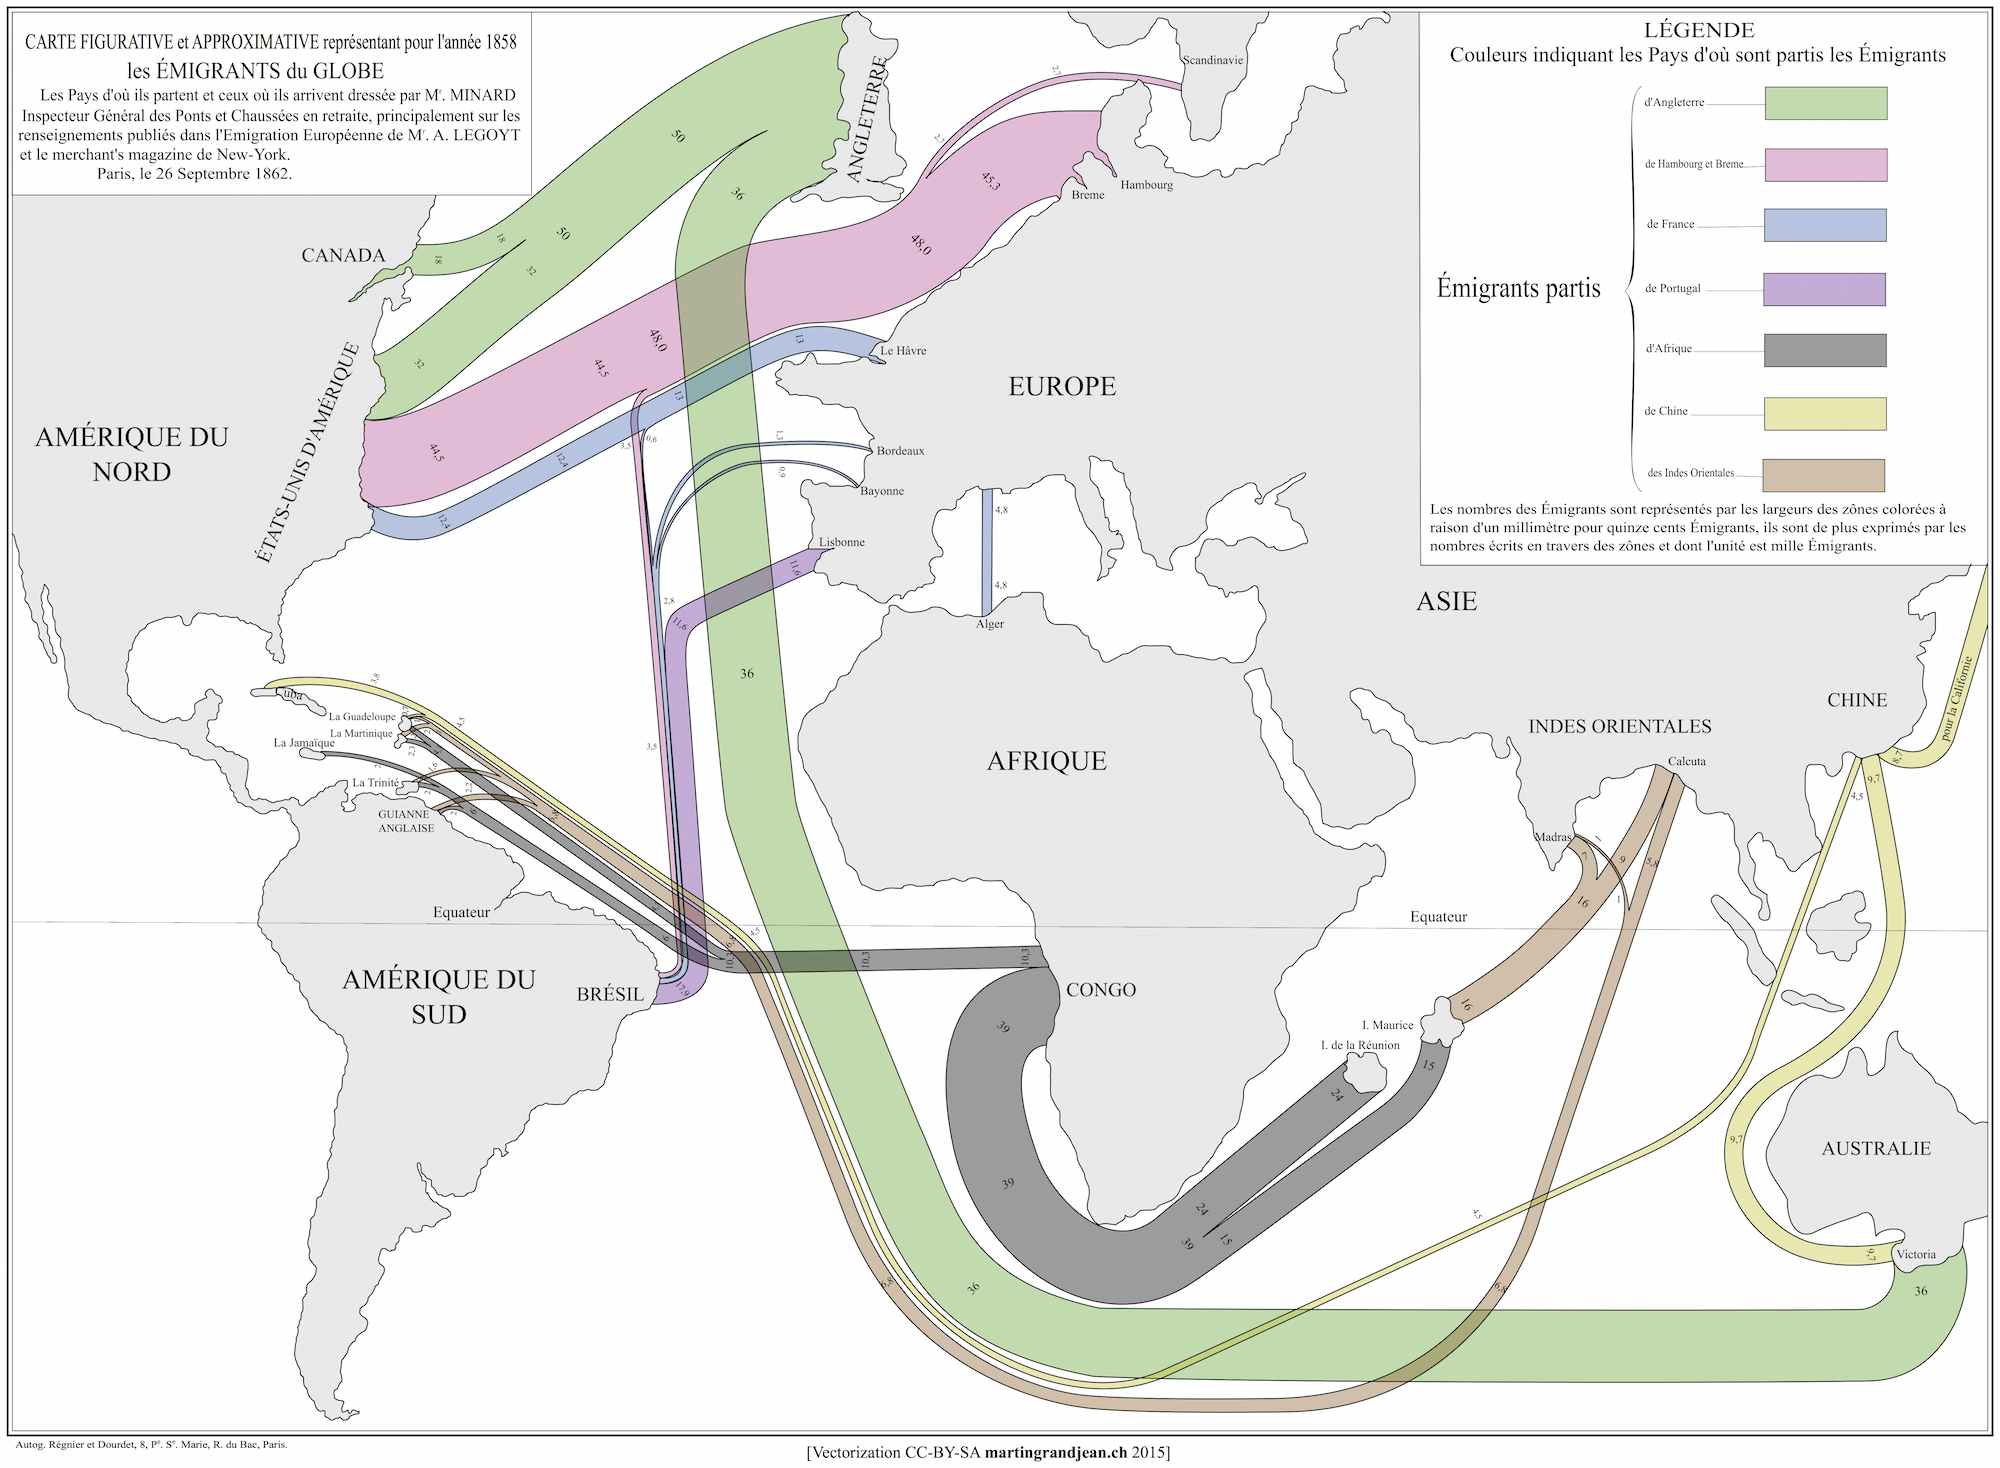 Minard’s 1858 Map of World Migration, see surrounding text